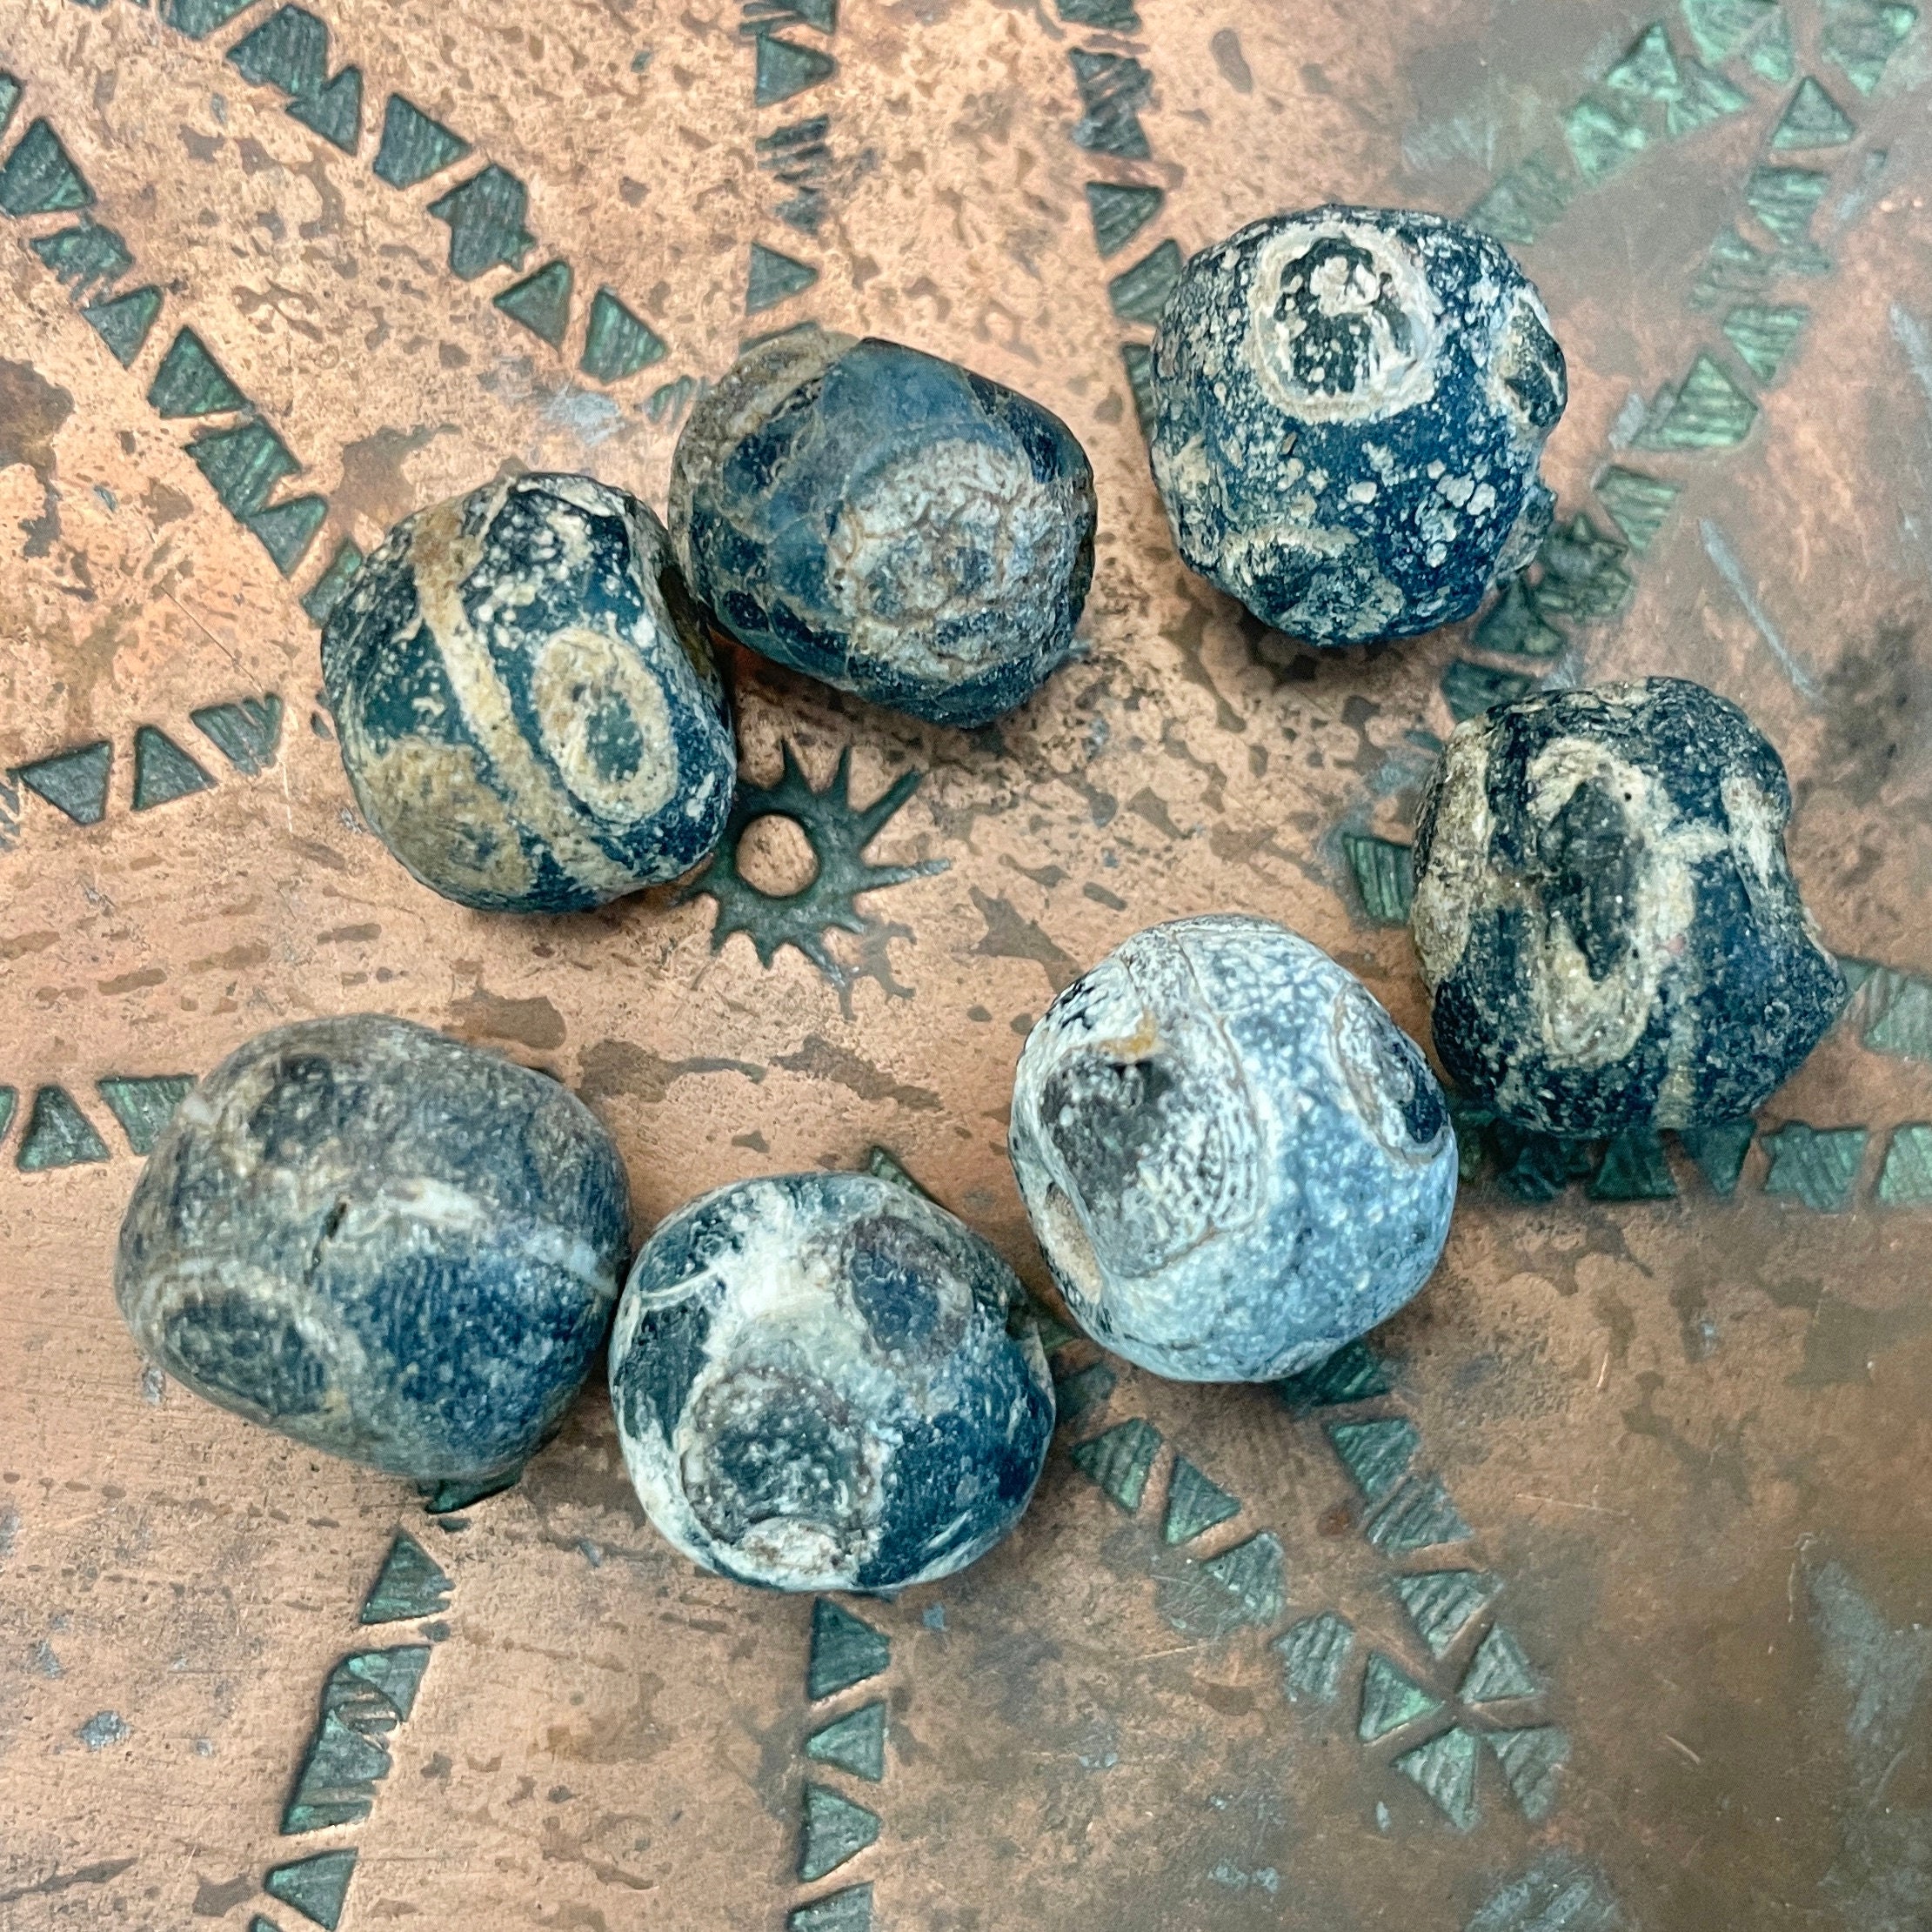 Choice of Vintage Mother of Pearl Gilgit Buttons - Rita Okrent